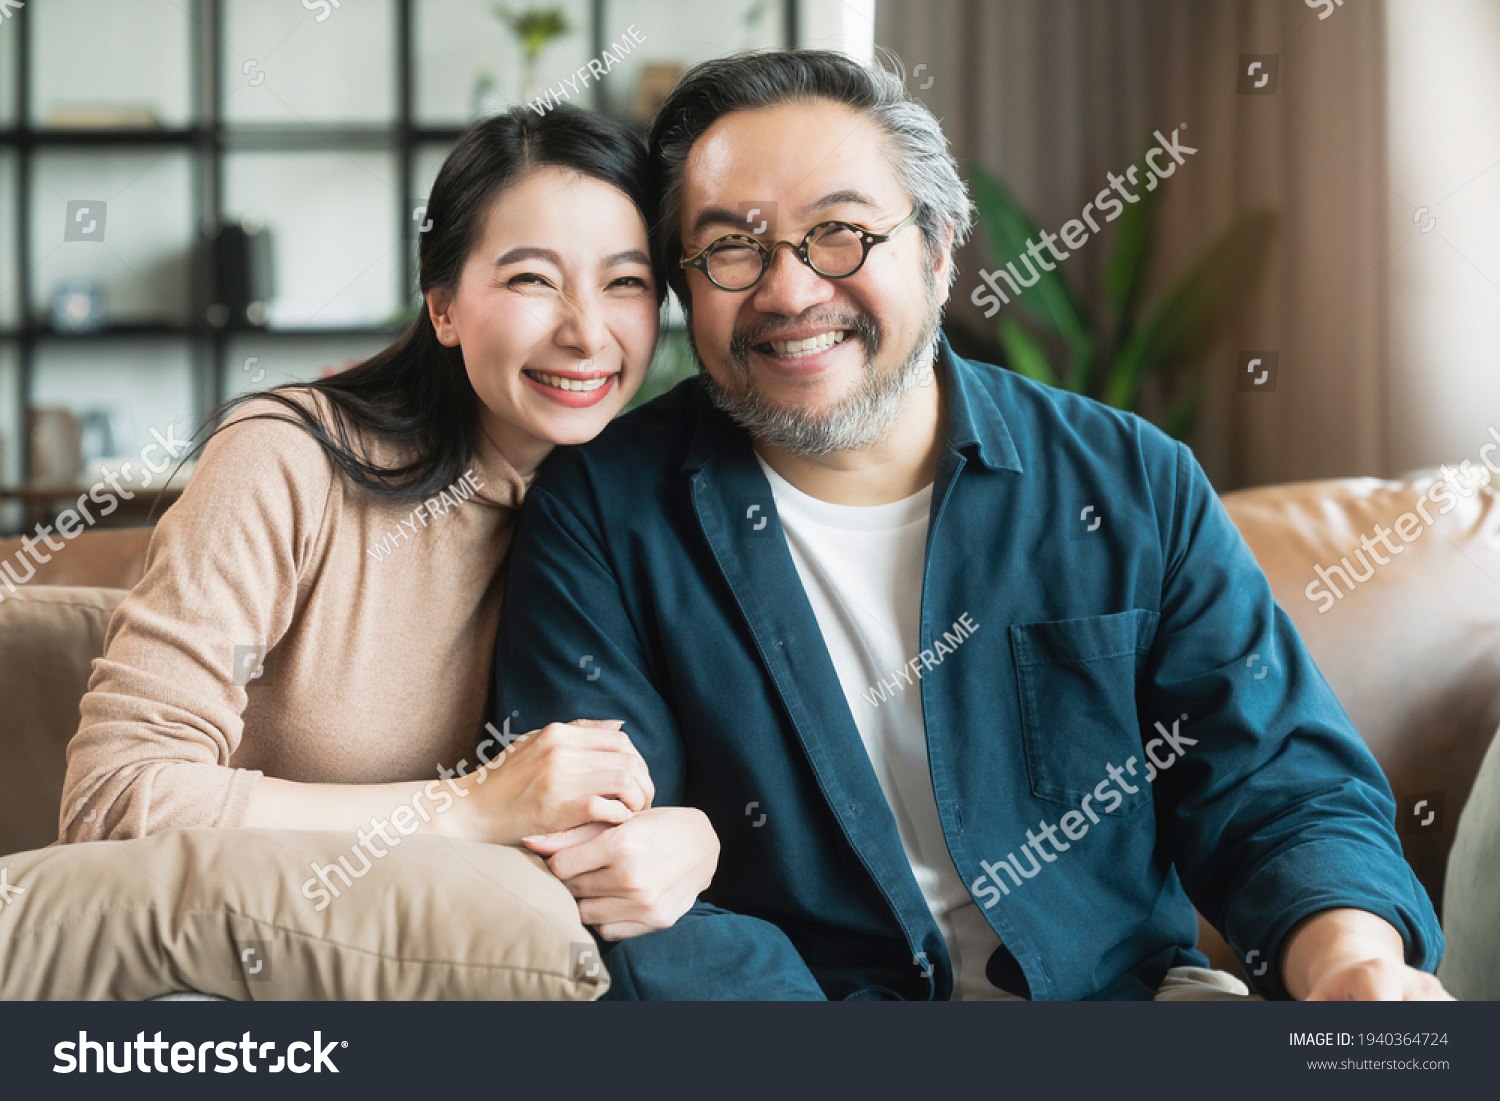 Portrait of Asian mature couple sitting and smiling in living room. wife woman hand hold husband arm from behind and look at camera with happiness and cheerful safty amd insurance family concept #1940364724